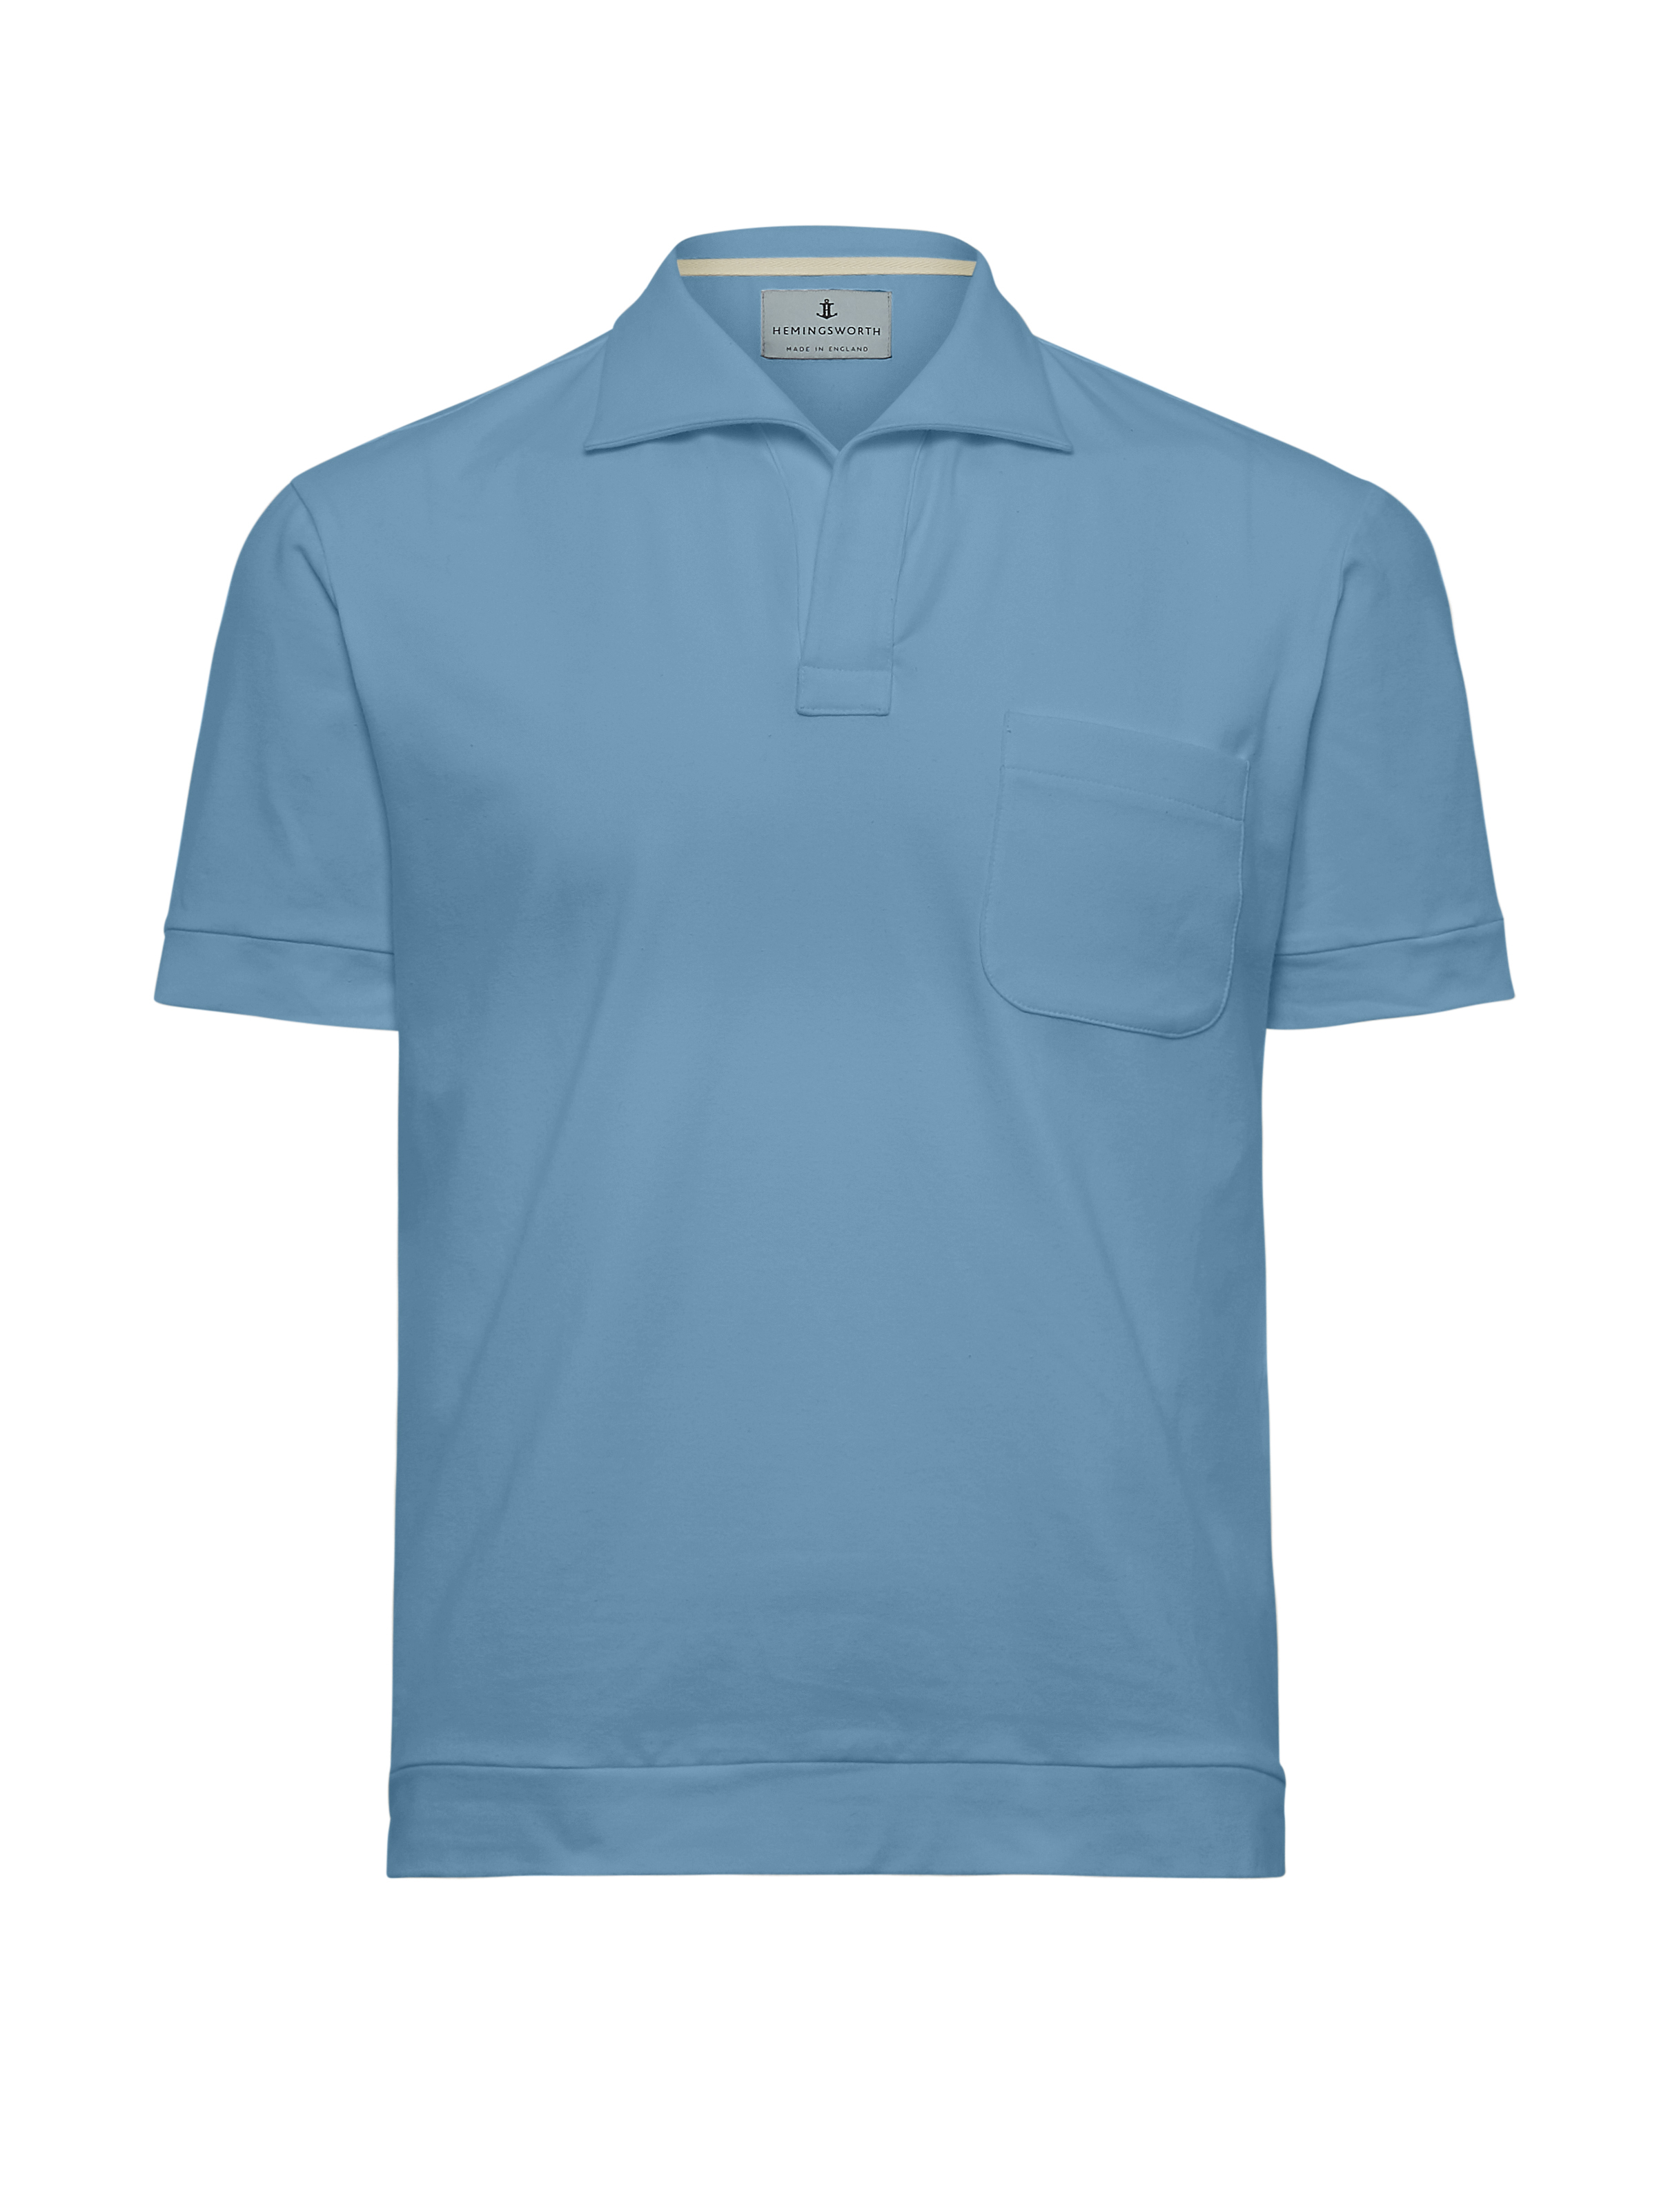 Pale Blue Solid Polo Shirt - Hemingsworth - Made in England